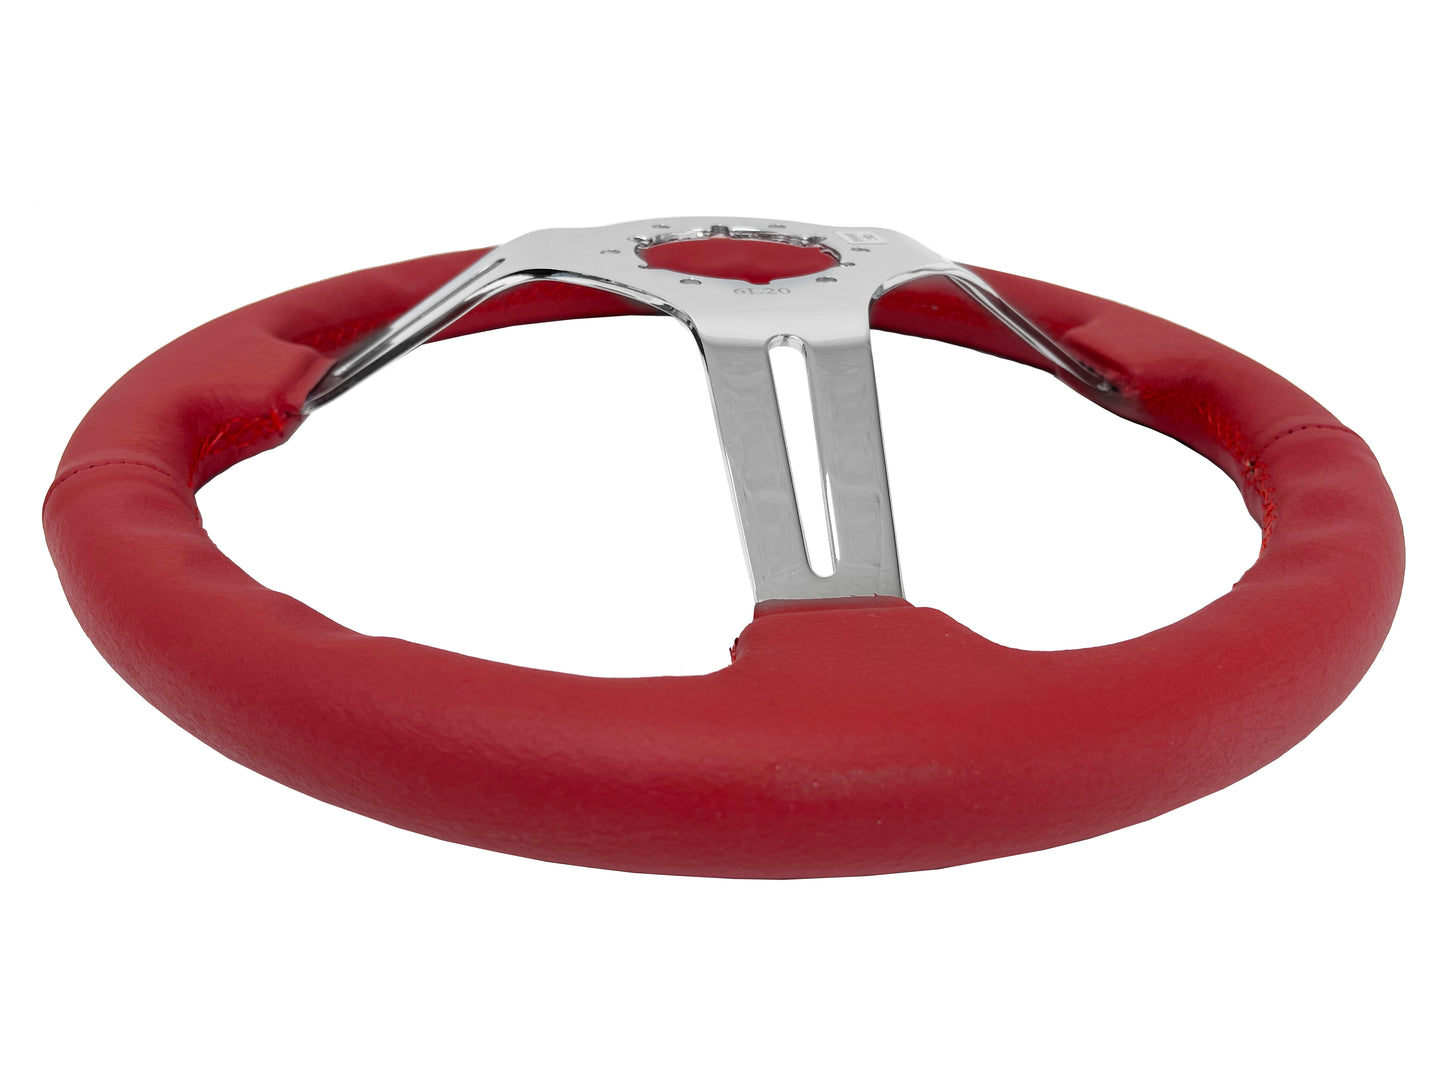 VSW S6 Sport Steering Wheel | Red Leather, Chrome | ST3012RED